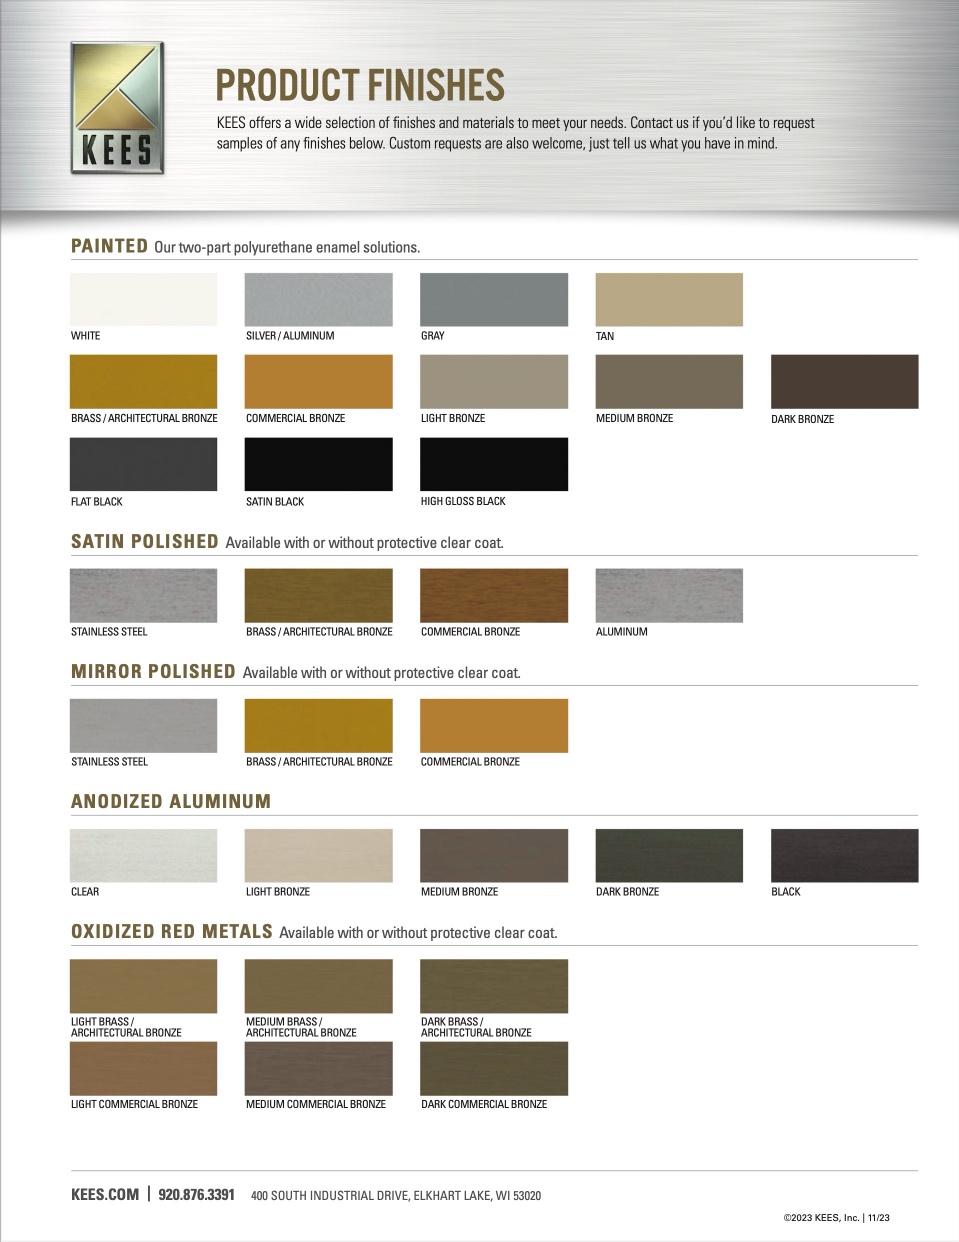 Product Finishes Brochure